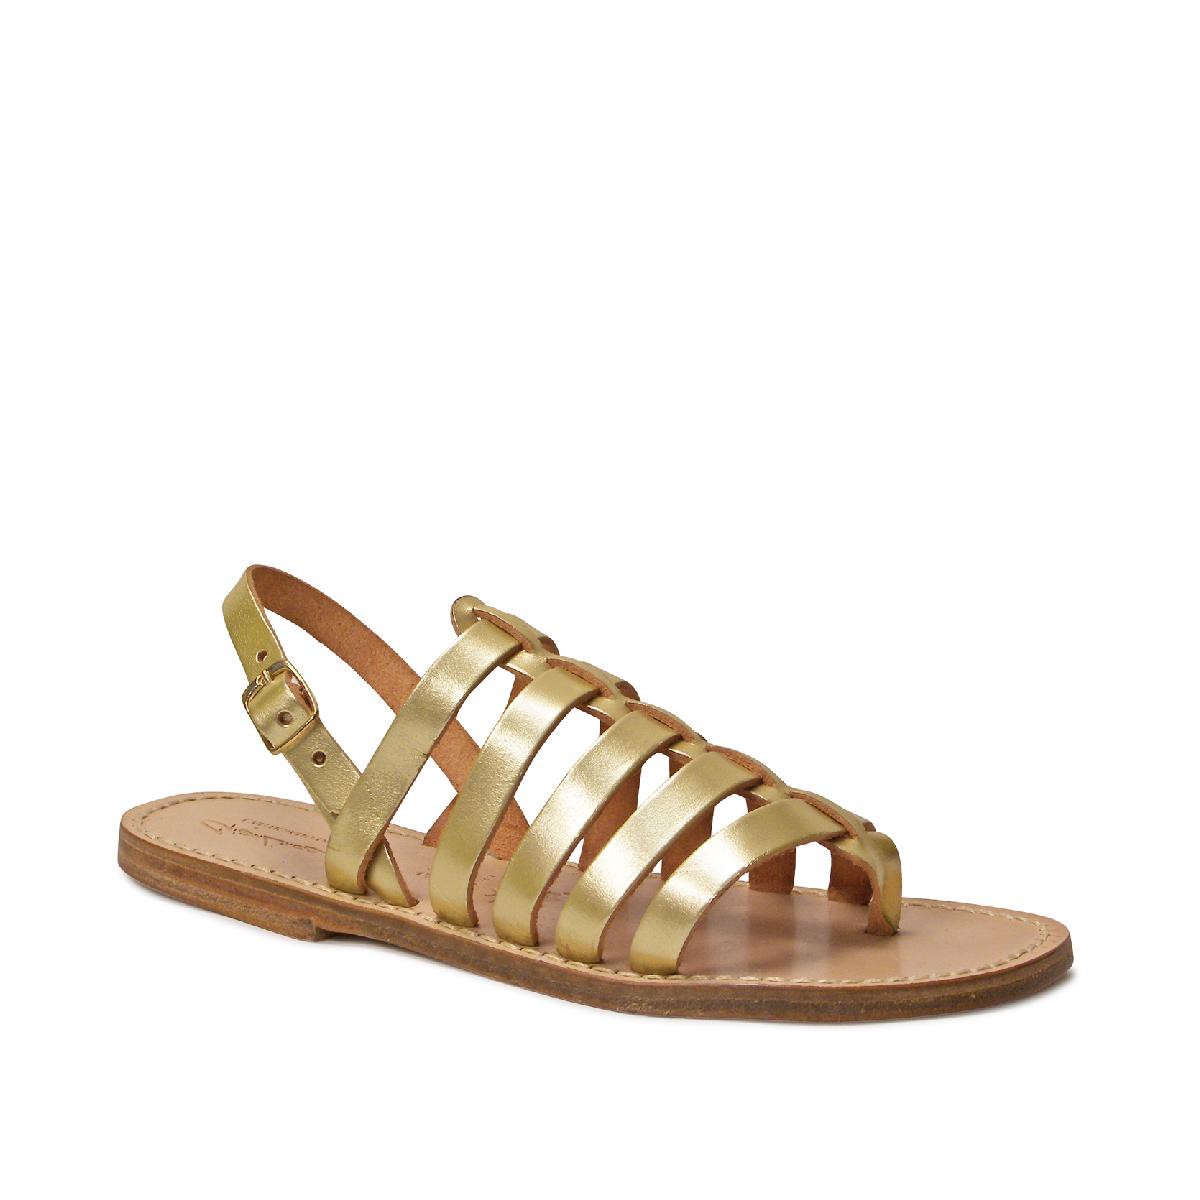 Gold flat sandals in real leather Handmade in Italy | The leather craftsmen